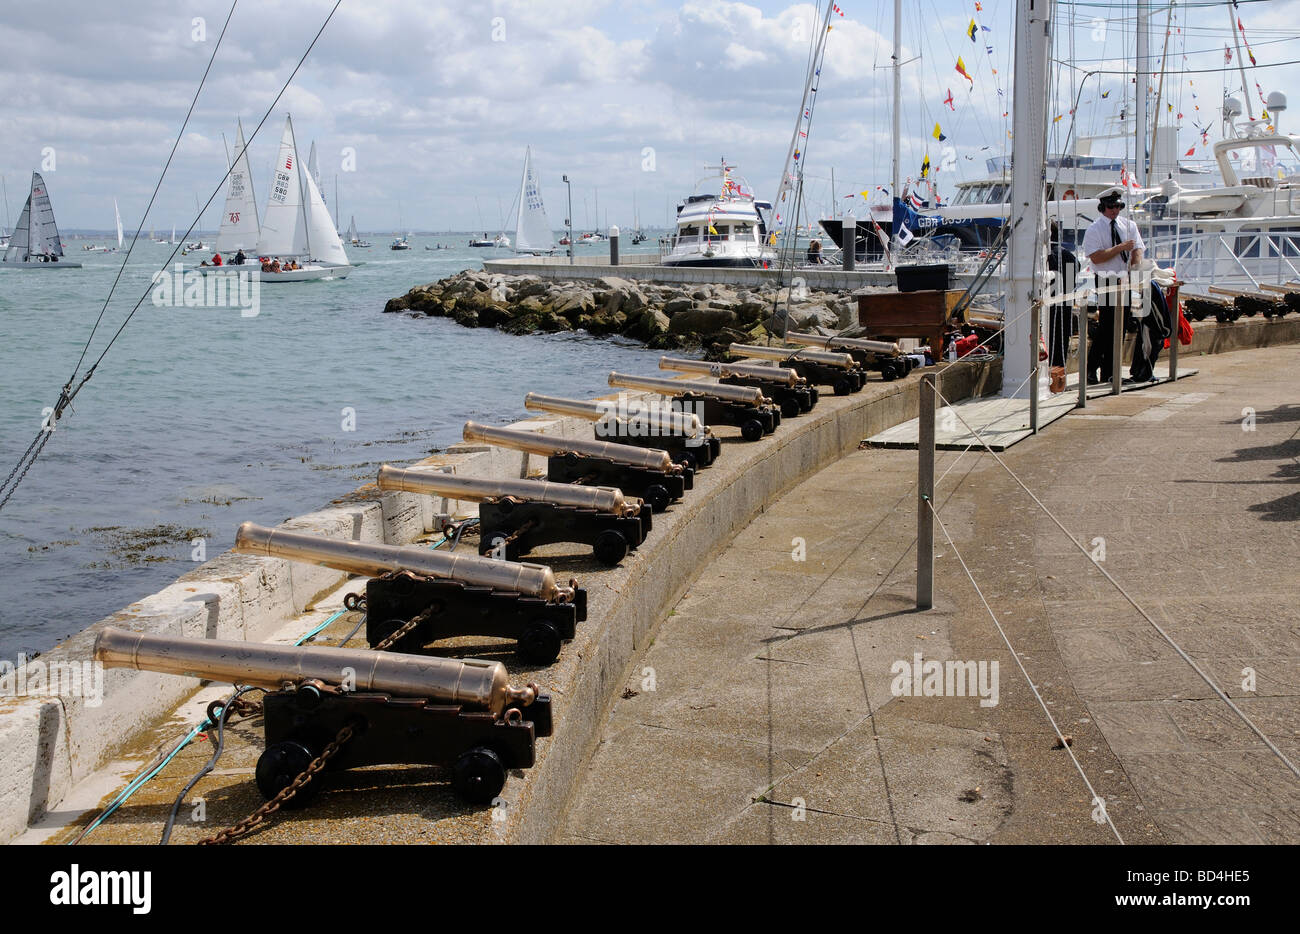 RYS yacht race starting cannons on the Cowes town shore England UK Stock Photo